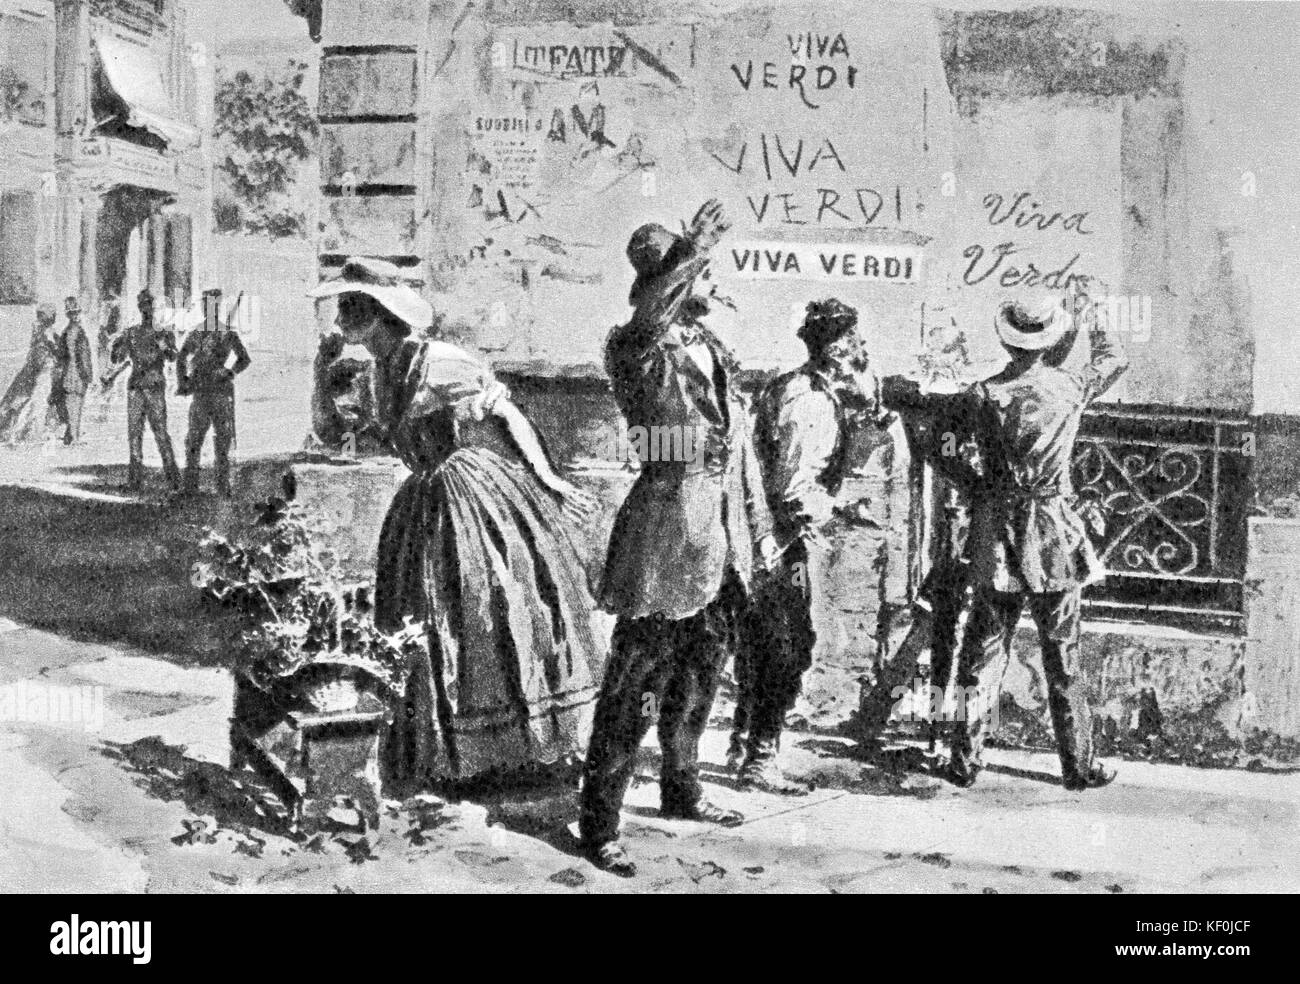 People writing 'Viva Verdi' on a wall, 1859. There was popular support for Verdi at the time of the union of Parma with Piedmont, which he was involved in.  Italian composer 1813-1901 Stock Photo